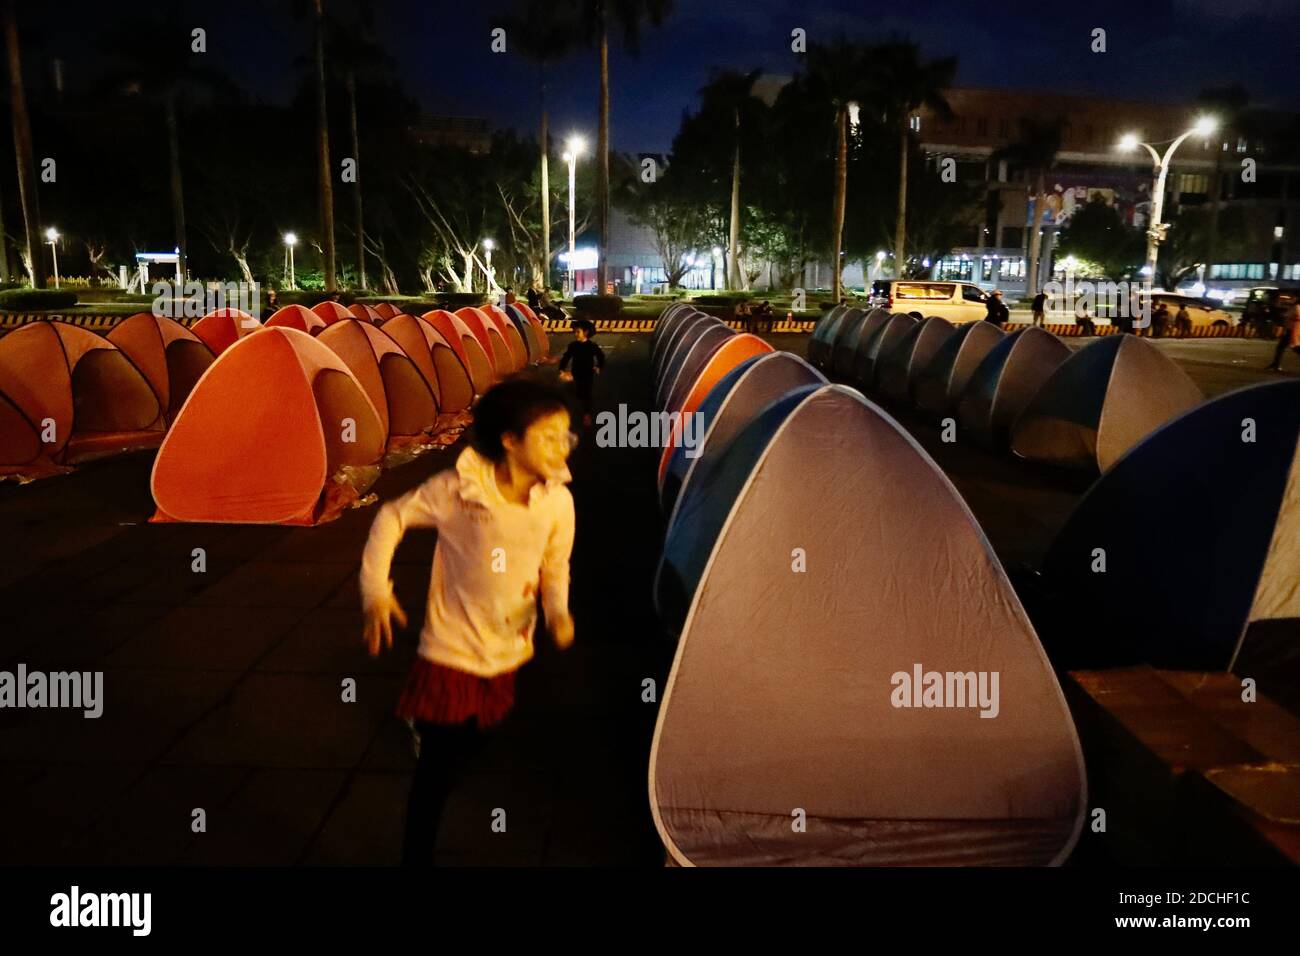 Protesters camp at Liberty Square during the demonstration.Protest against the revoking of the operation license for CTi News, a pro Kuomintang (KMT) television company, by the National Communication Commission, in Taipei City. Stock Photo